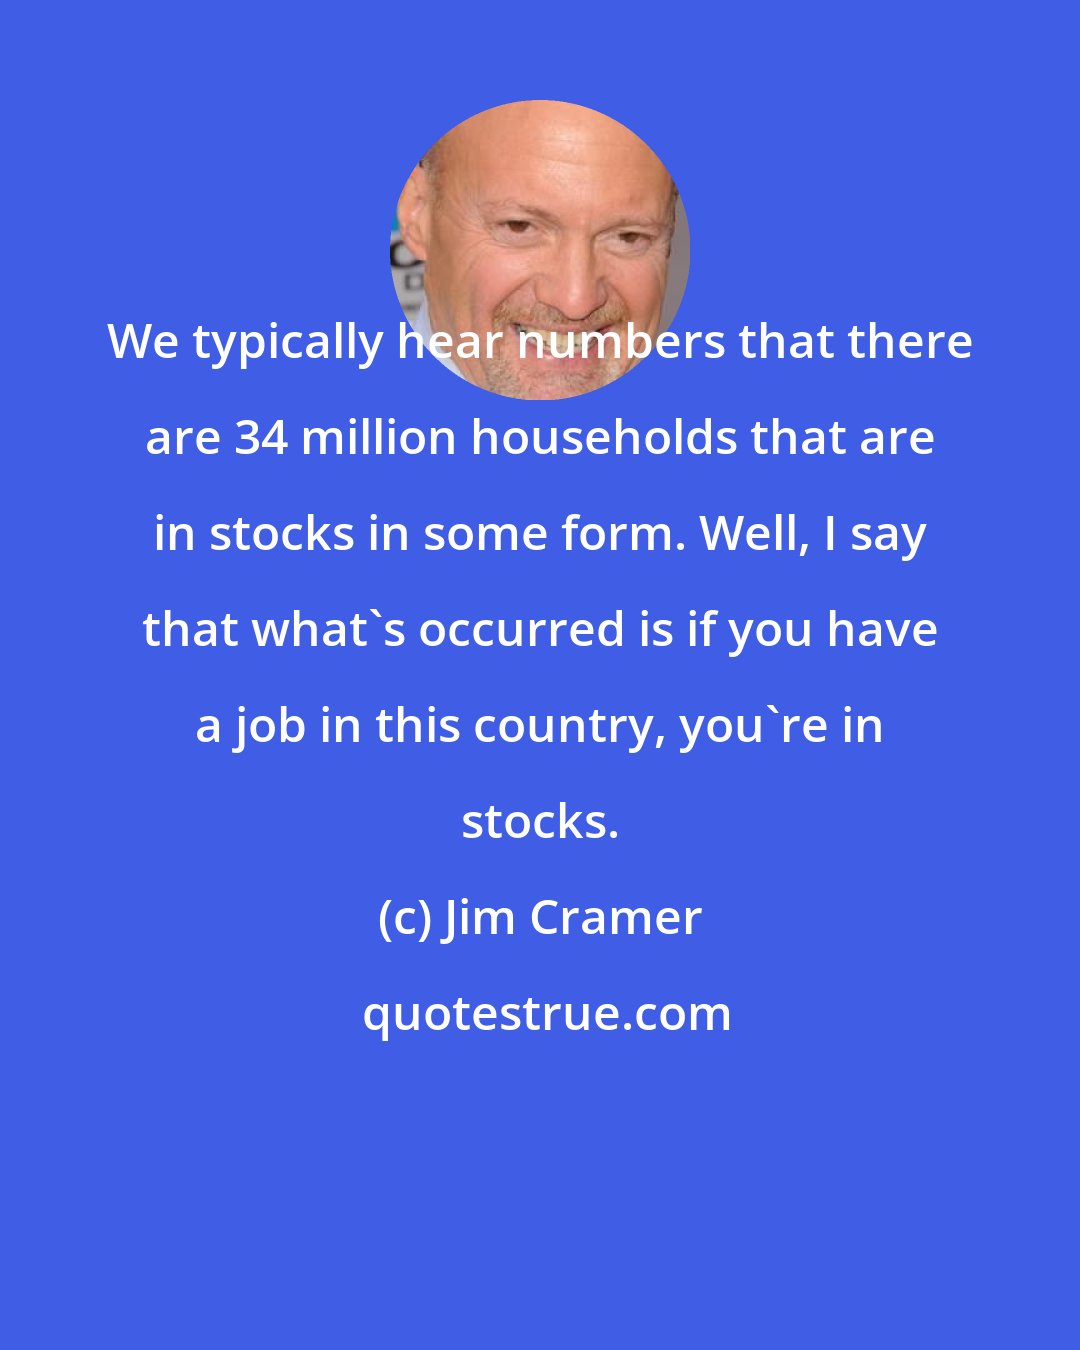 Jim Cramer: We typically hear numbers that there are 34 million households that are in stocks in some form. Well, I say that what's occurred is if you have a job in this country, you're in stocks.